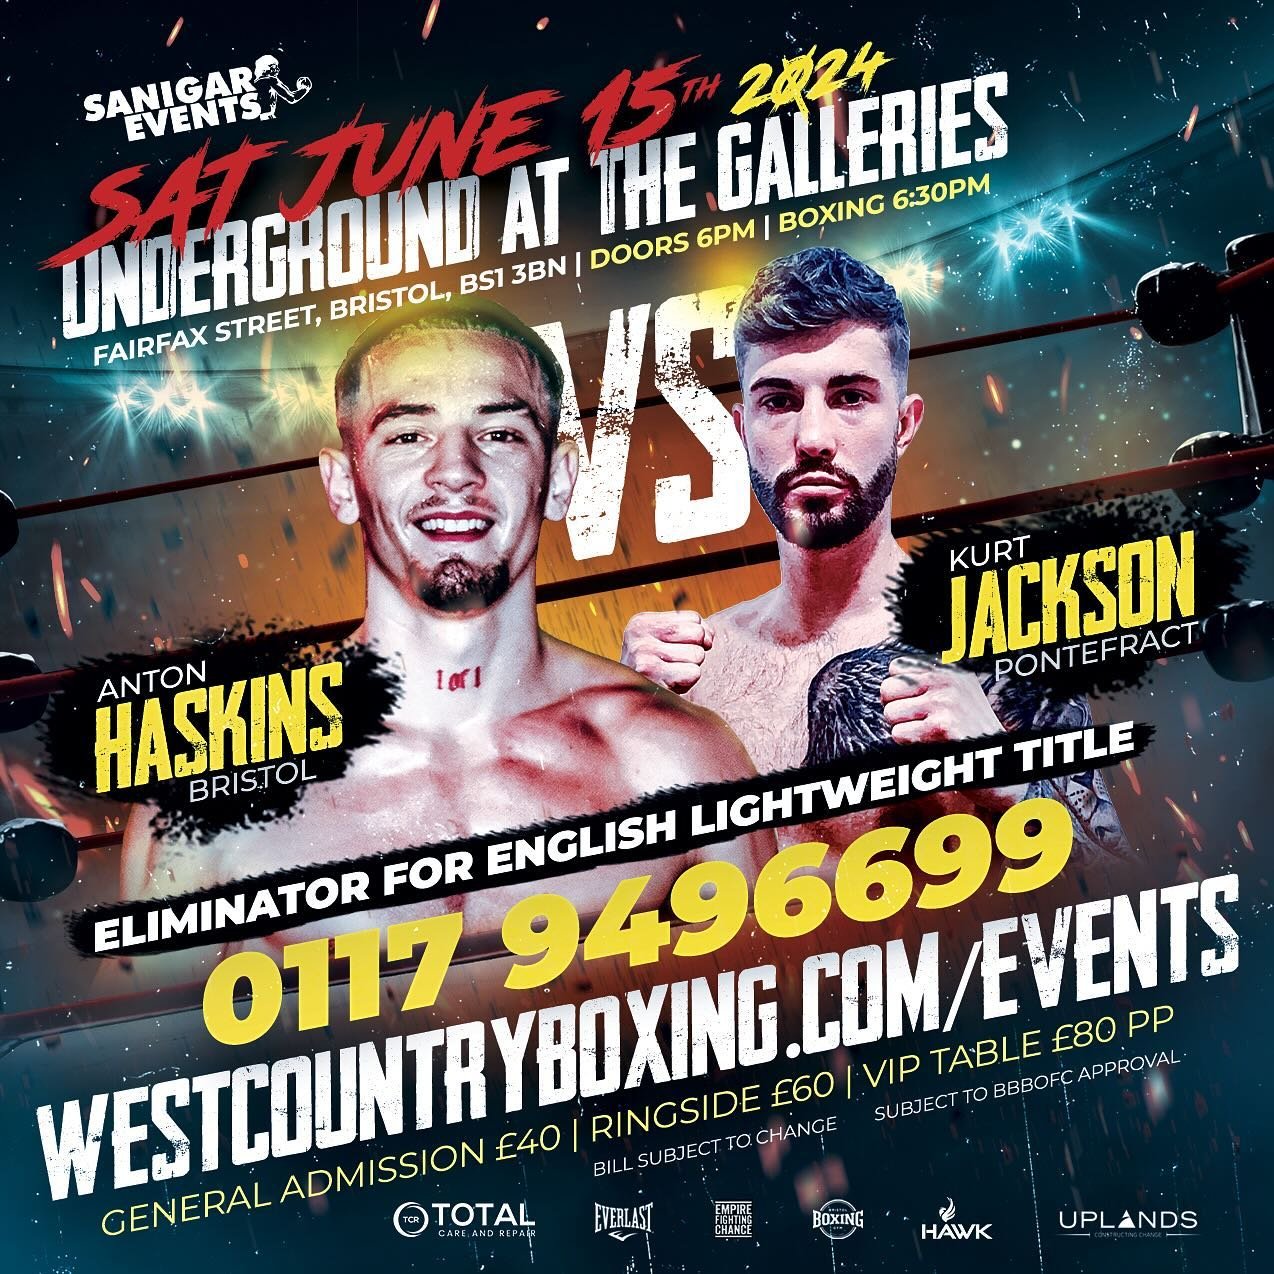 Bristol&rsquo;s @anton.haskins.3 takes on @kurtjacksonnn in an eliminator for the English Lightweight title on Saturday 15th June as we return to Underground @ The Galleries for another massive night of boxing 🔥

𝐓𝐢𝐜𝐤𝐞𝐭𝐬 𝐚𝐯𝐚𝐢𝐥𝐚𝐛𝐥𝐞 𝐧